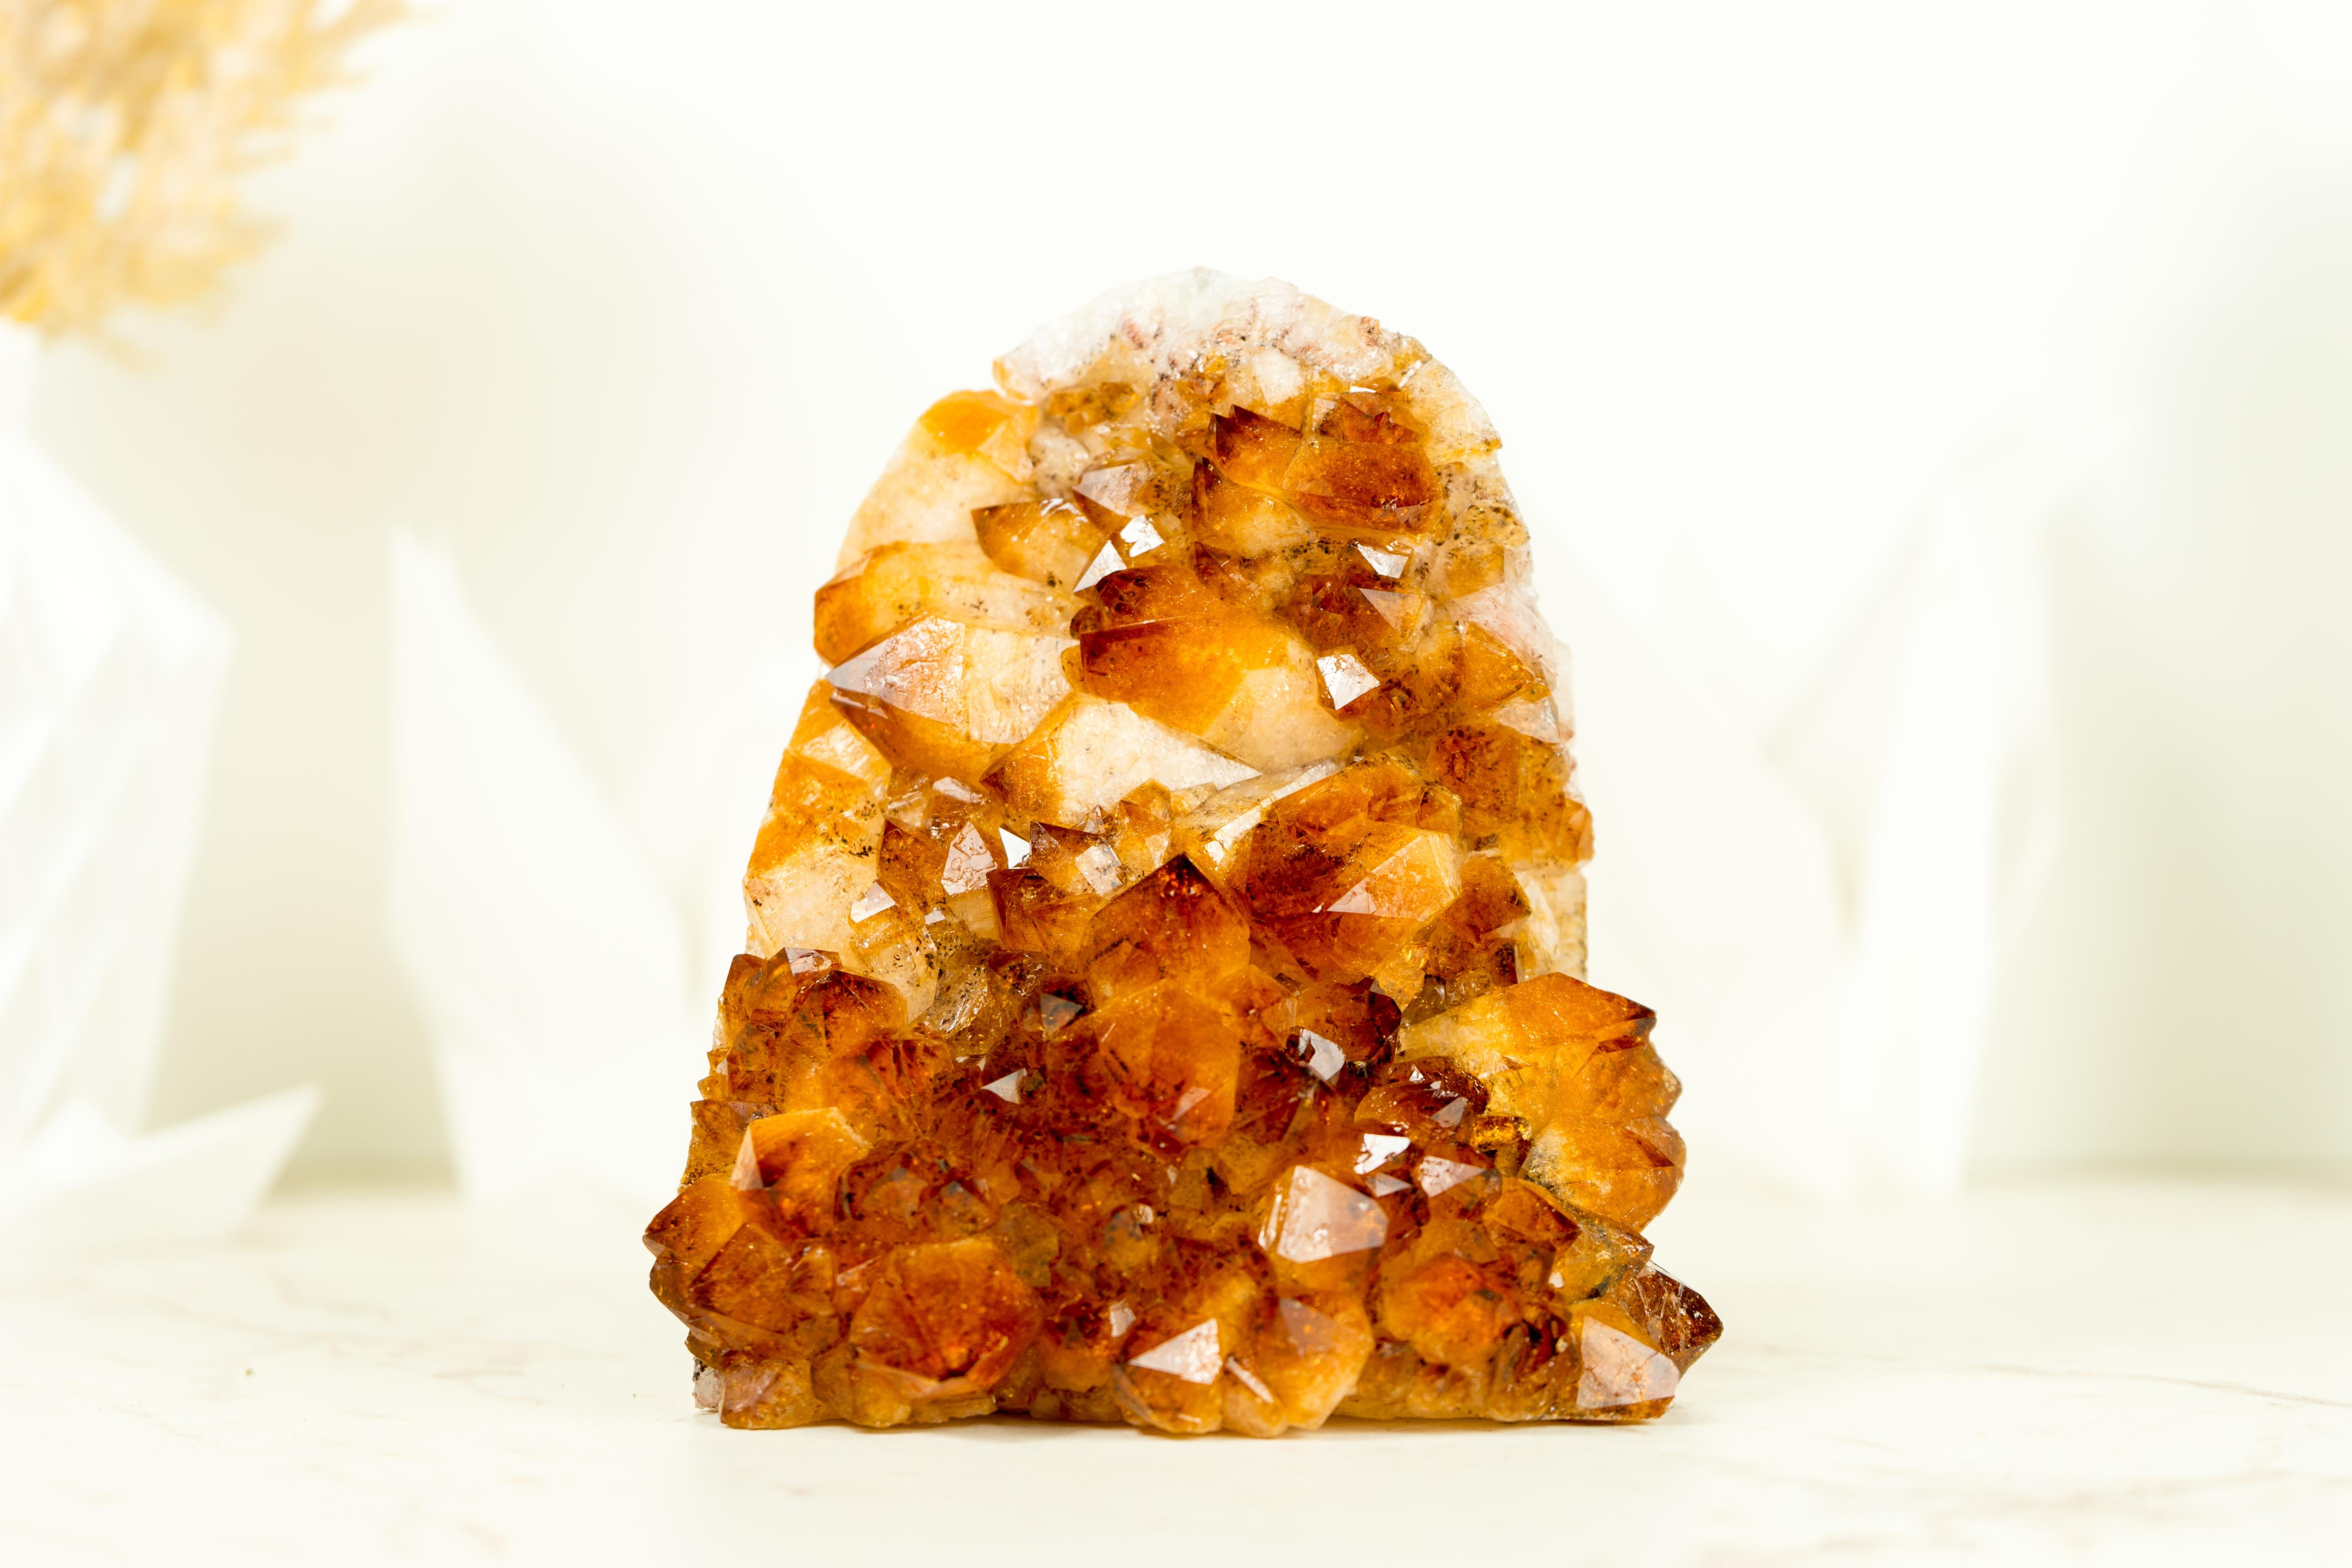 A Golden Orange Citrine Cluster considered to be world-class because of its color tones, gorgeous aesthetics, and rare characteristics, this Citrine Cluster will surely bring loads of energetic properties to your office table, home decor, or crystal